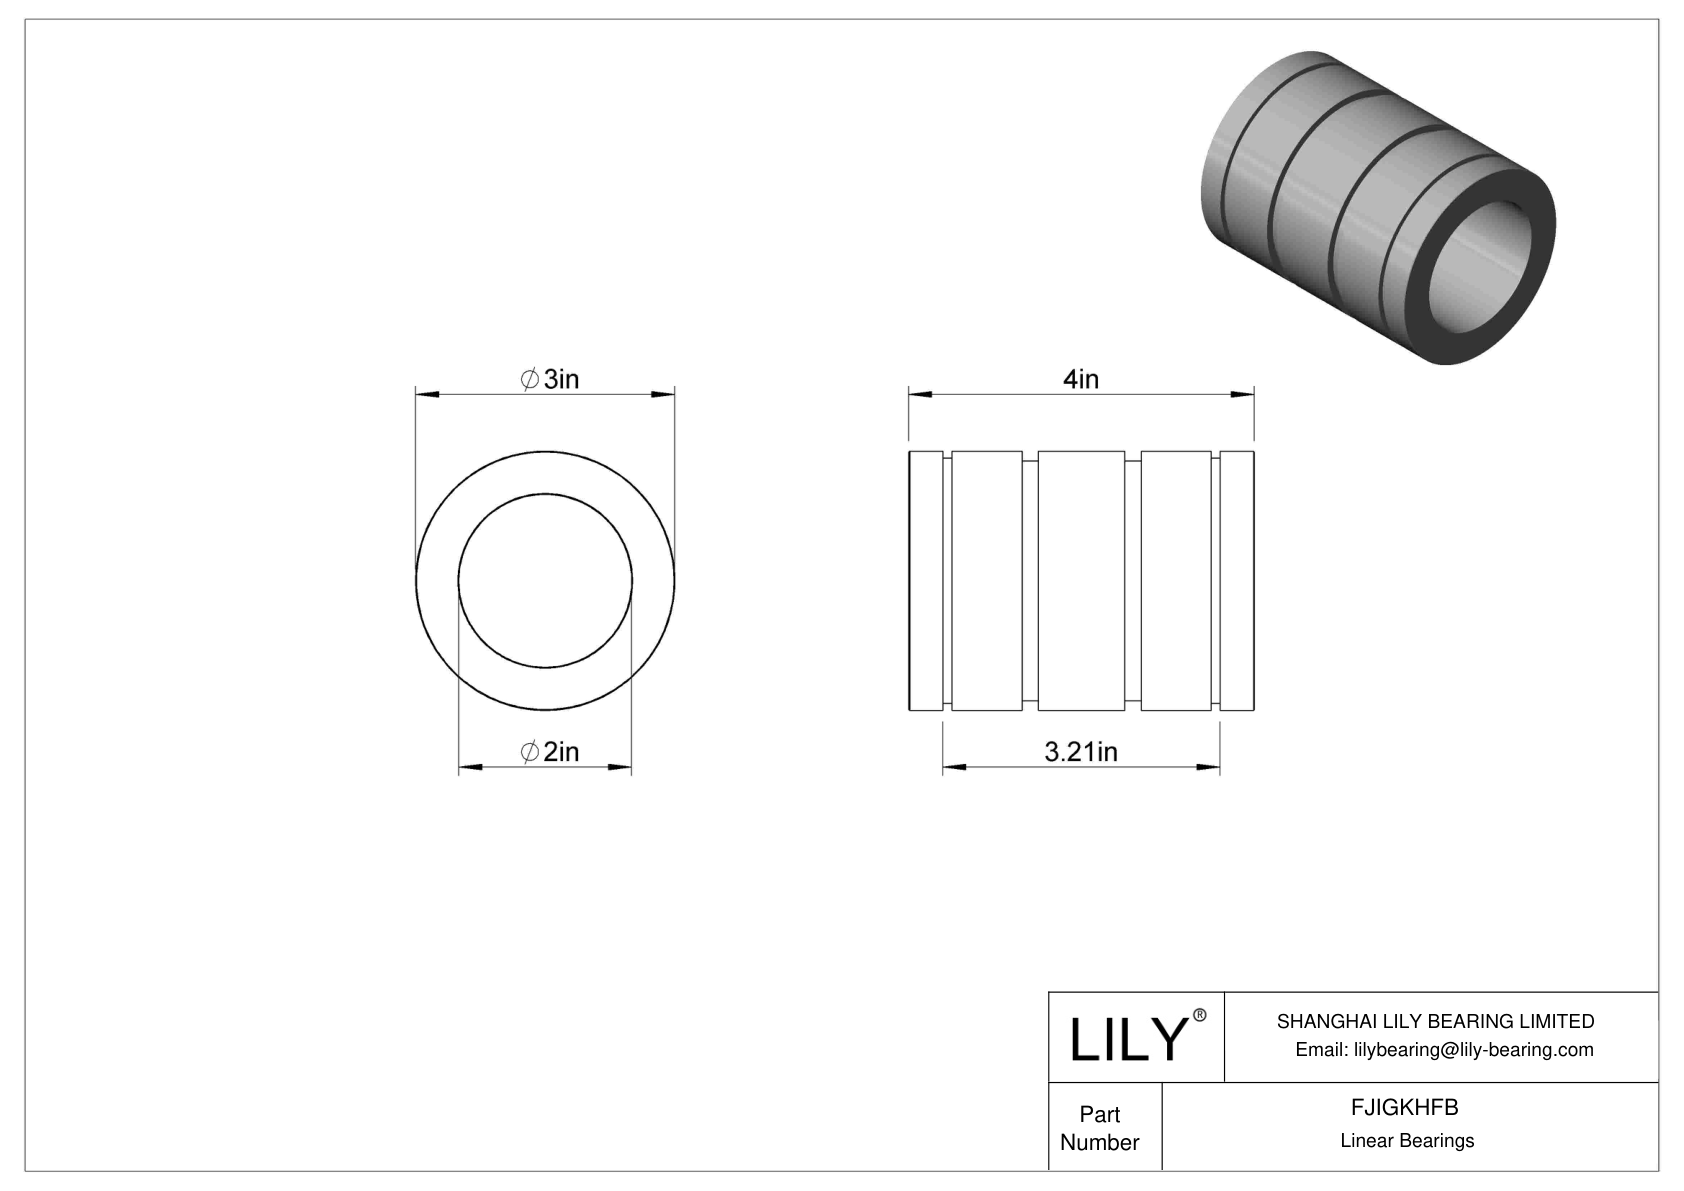 FJIGKHFB Common Linear Sleeve Bearings cad drawing